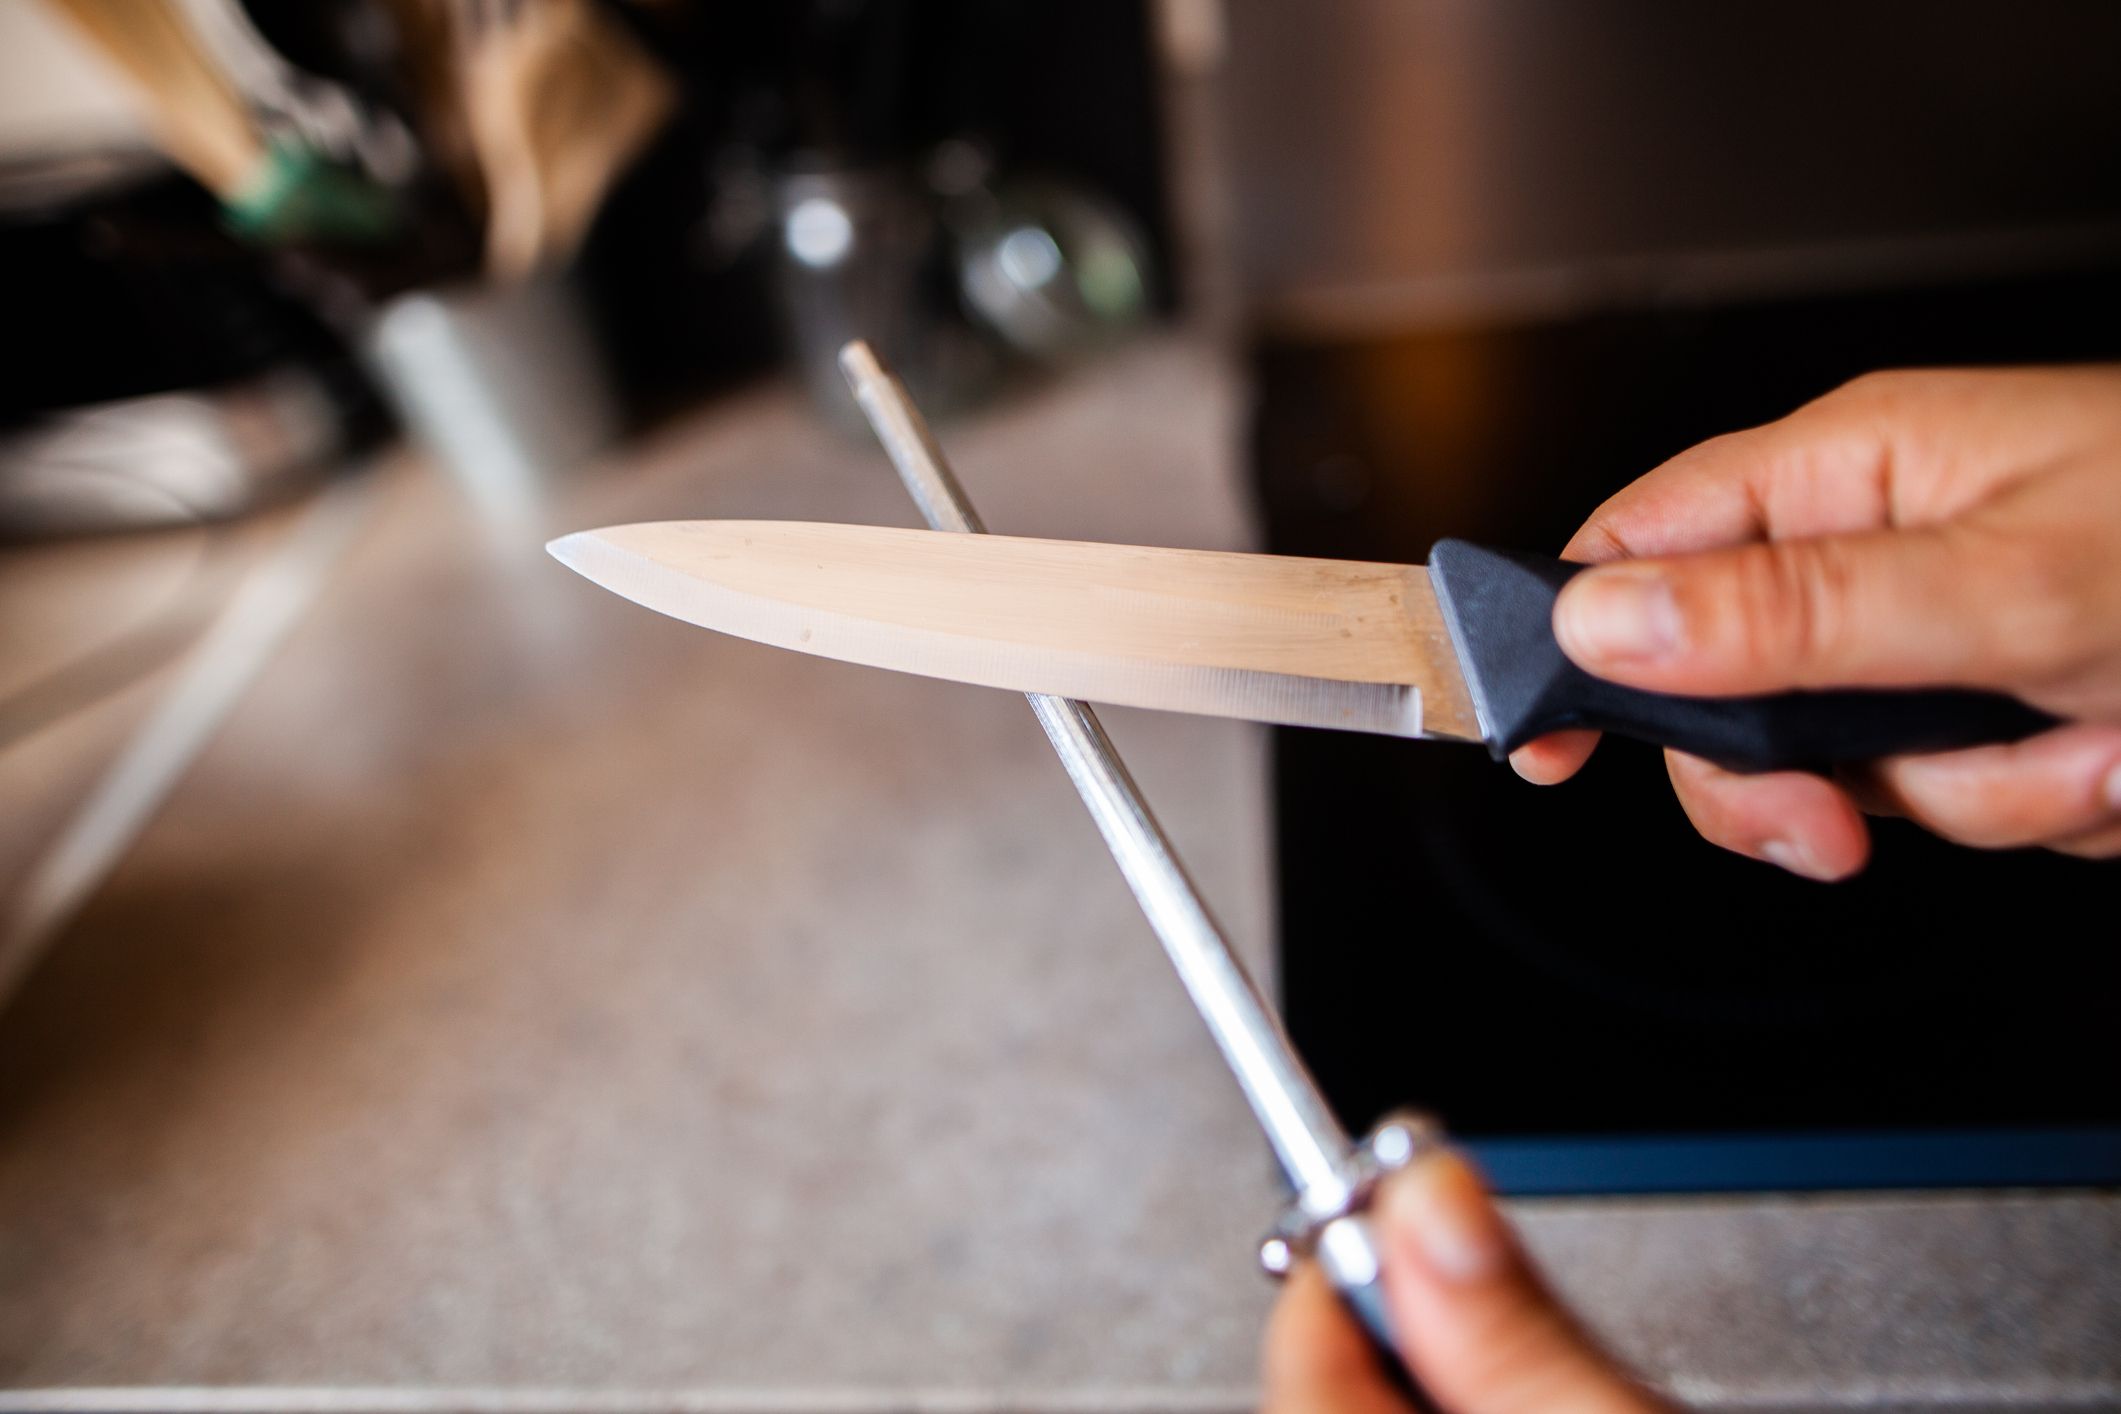 How to kitchen knife